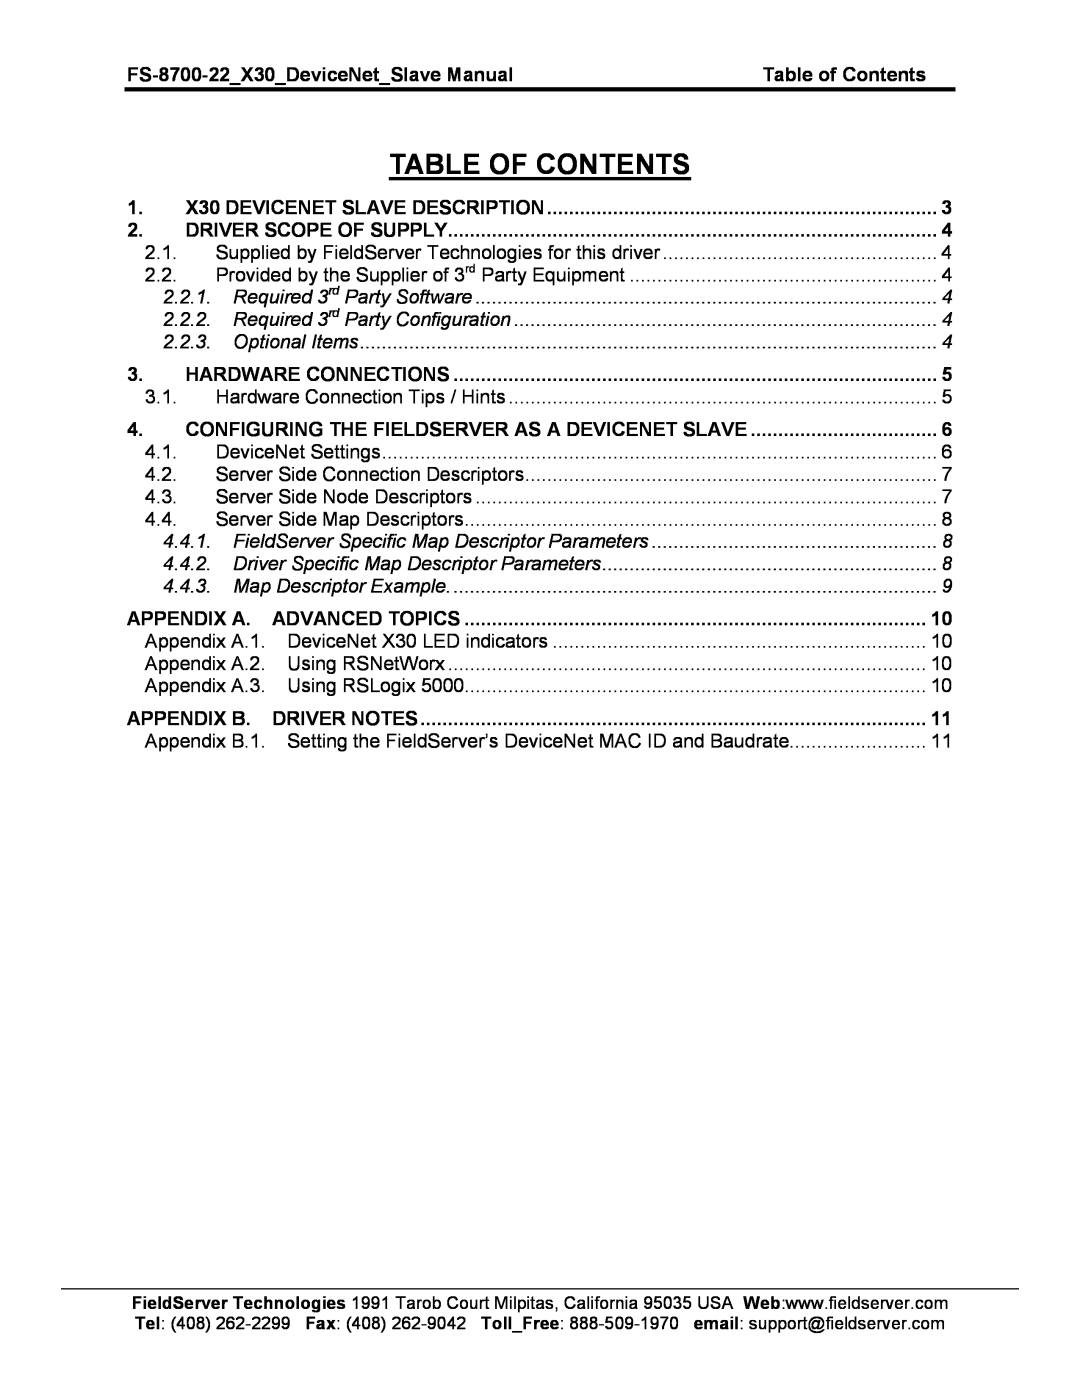 FieldServer FS-8700-22 X30 instruction manual Table Of Contents 